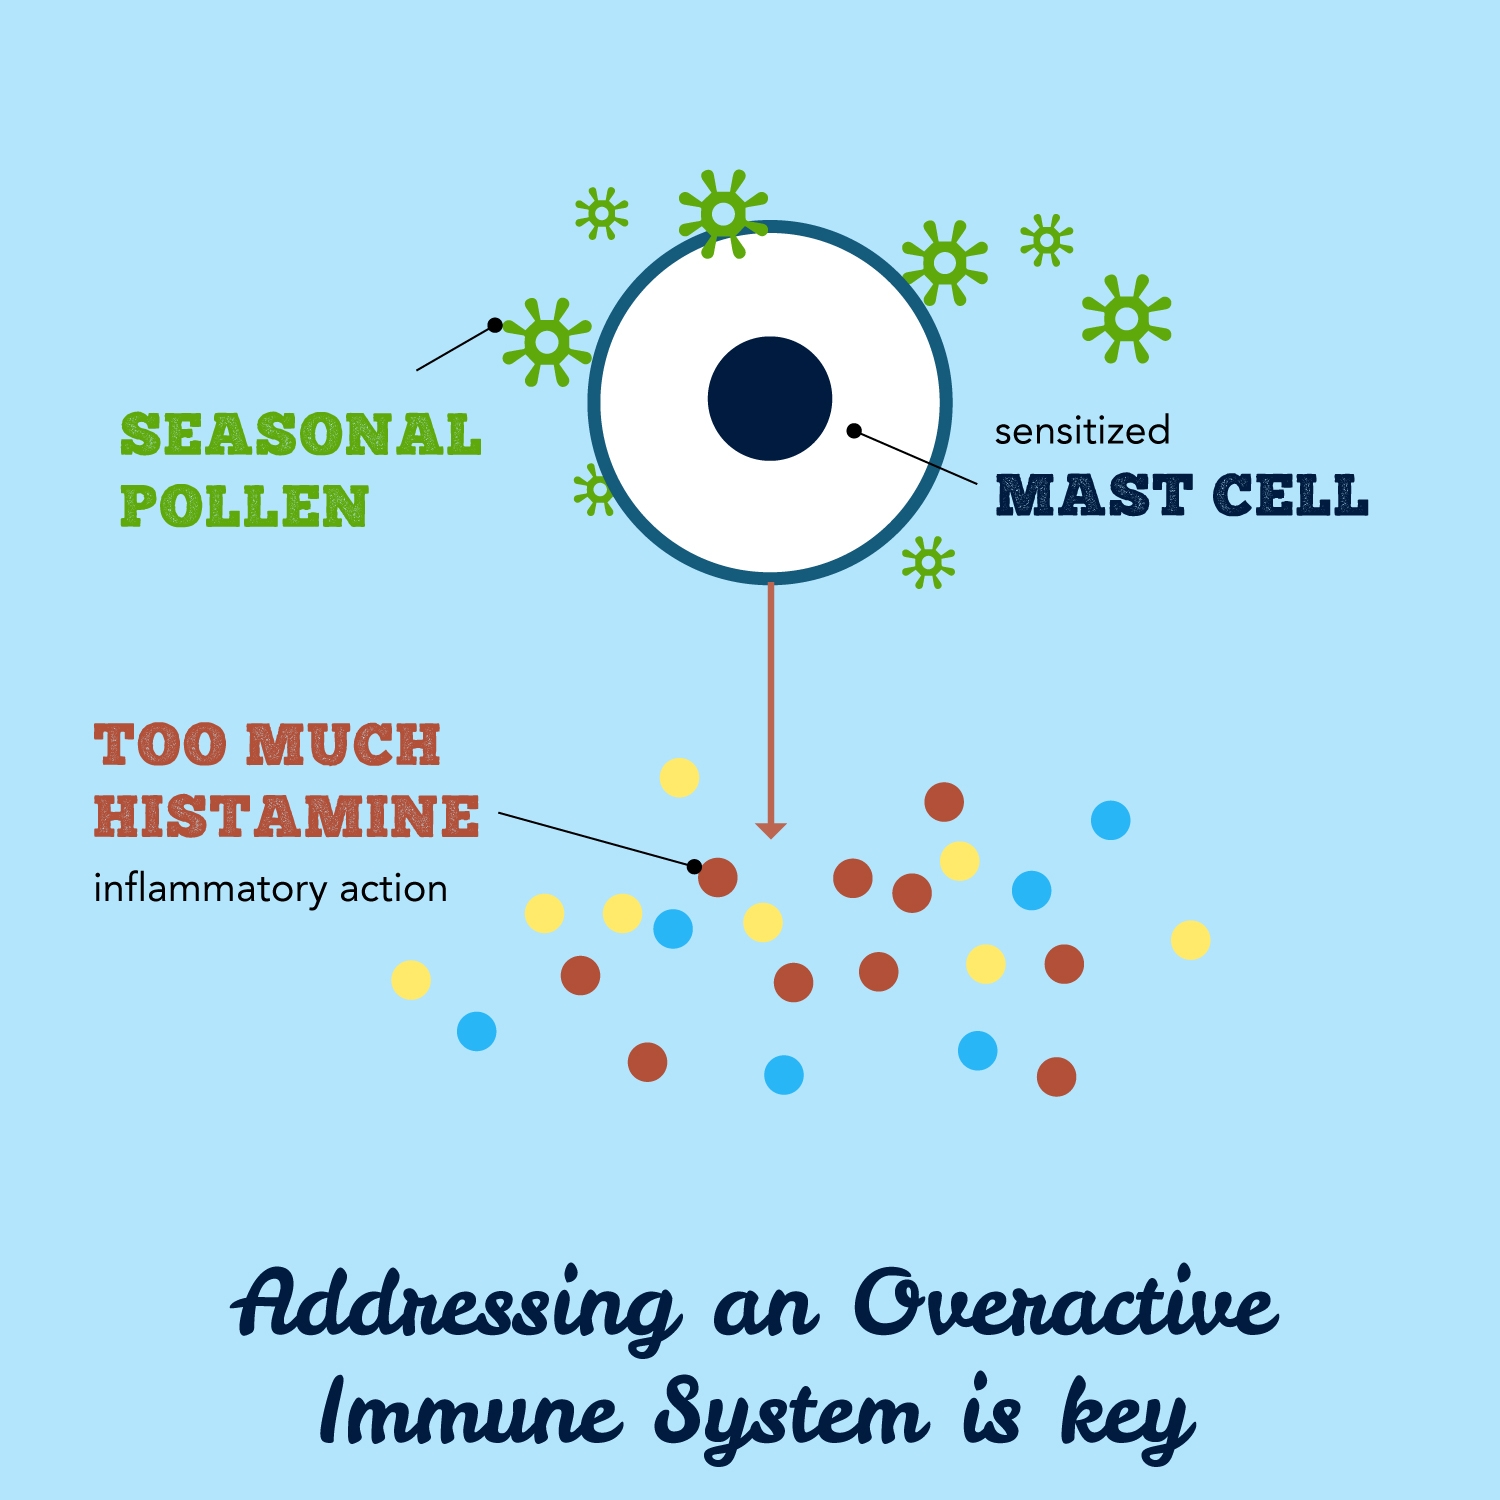 Addressing and Overactive Immune System is Key